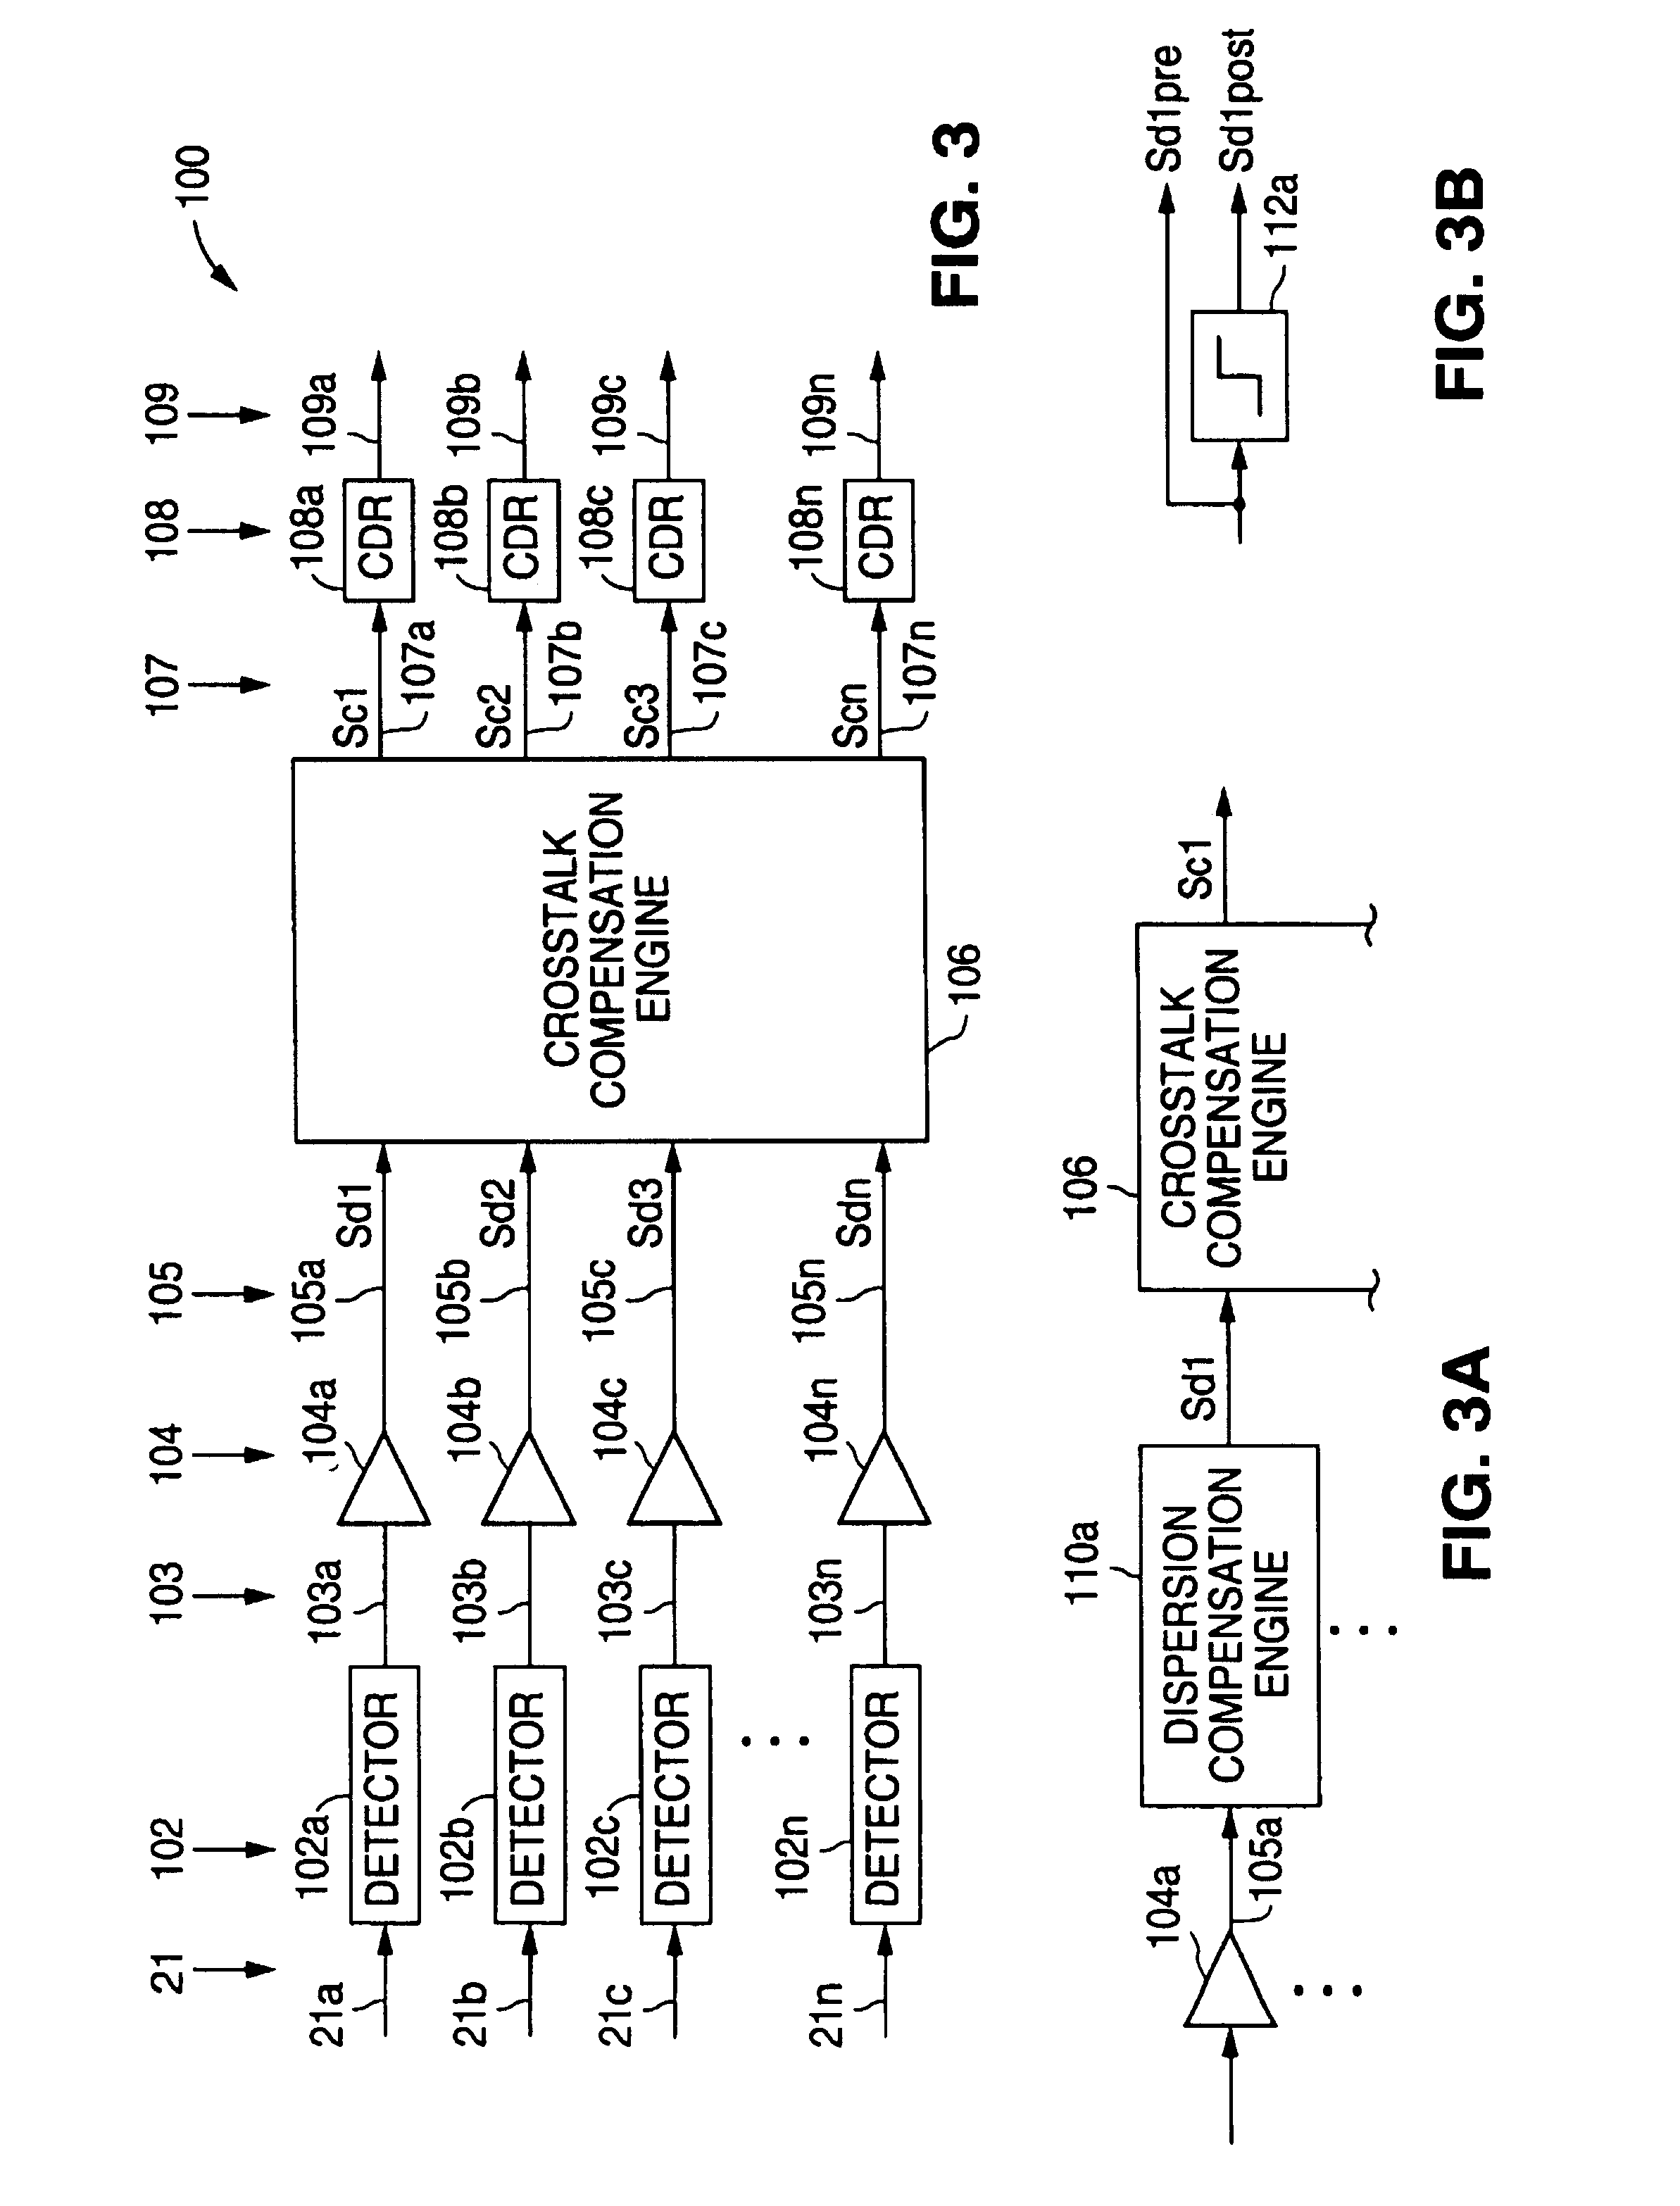 Crosstalk compensation engine for reducing signal crosstalk effects within a data signal